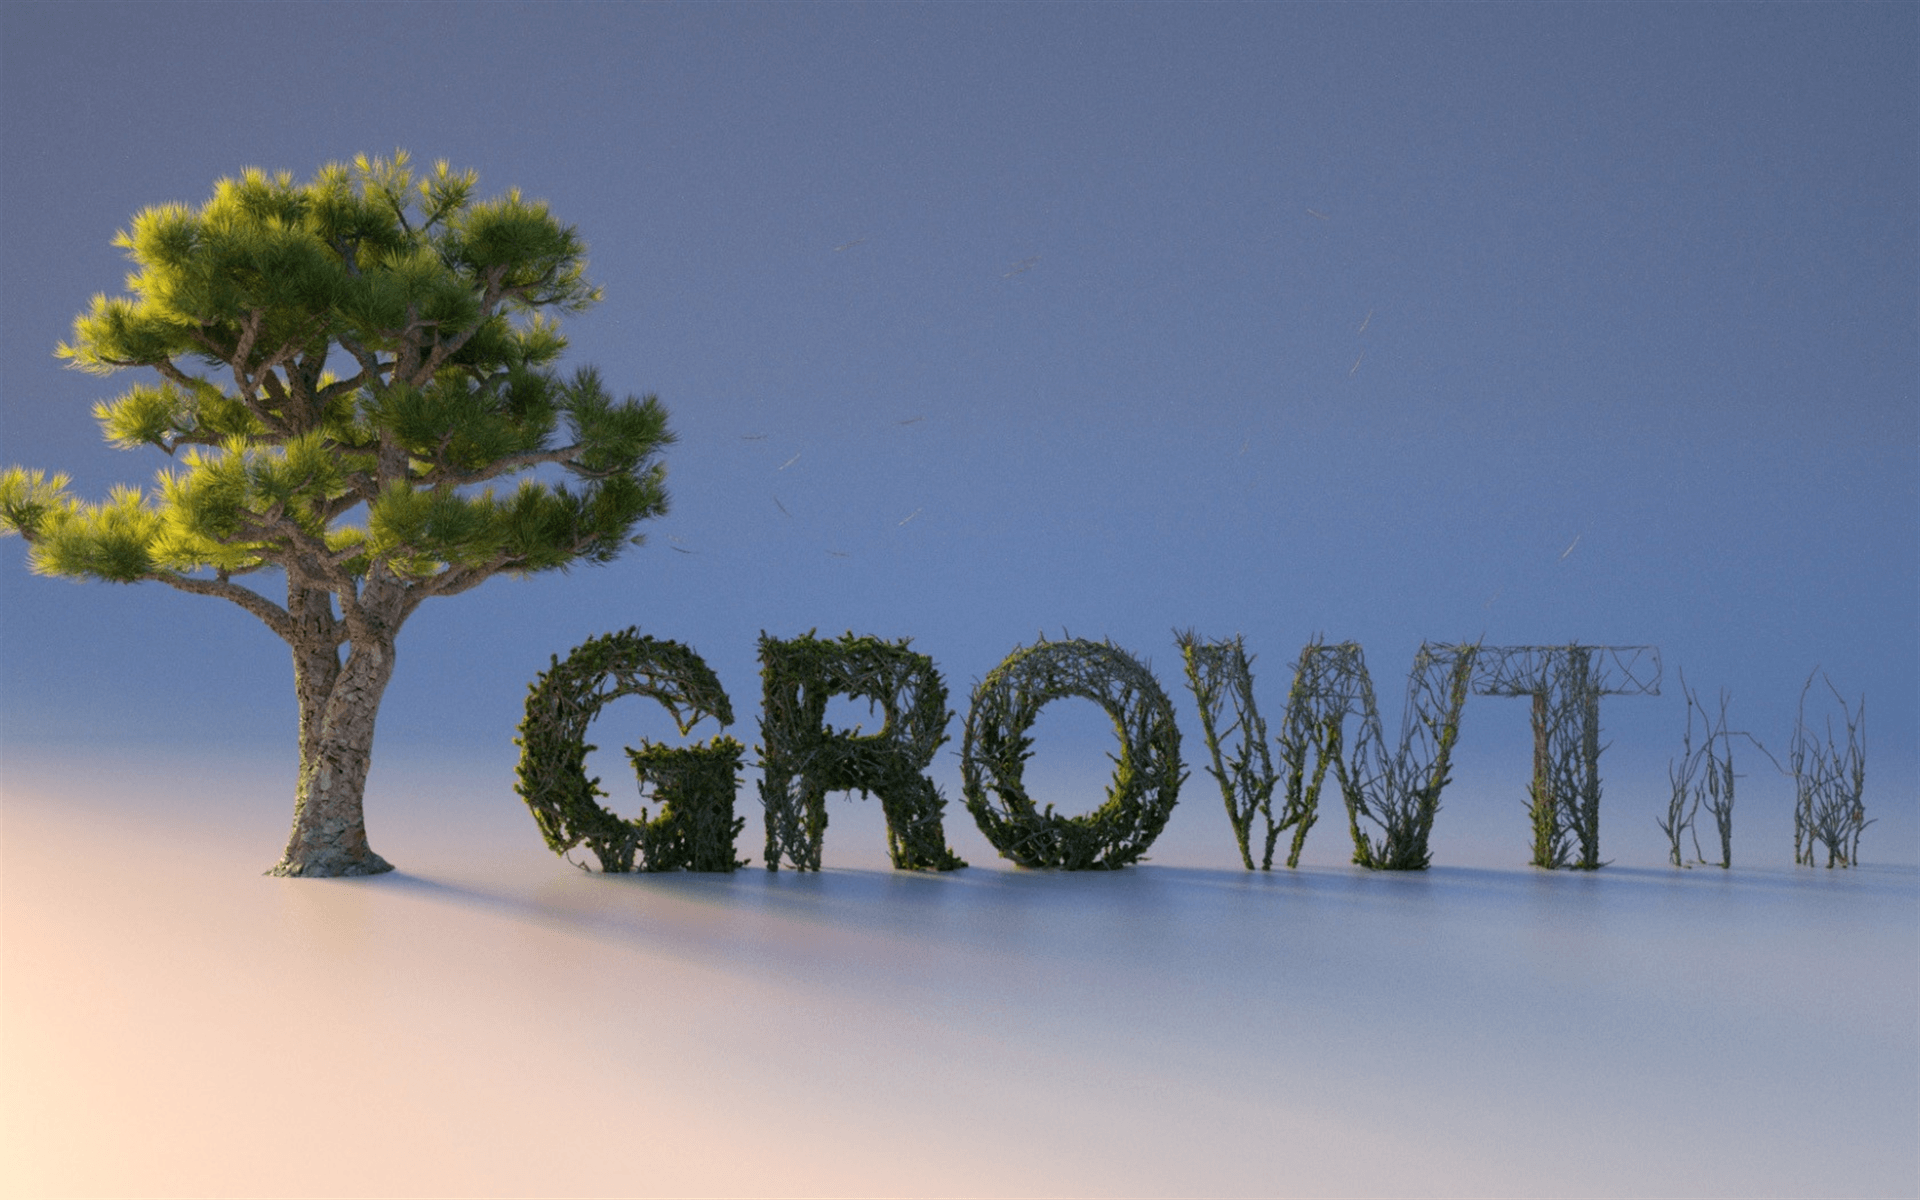 Download wallpaper growth concepts, creative 3D letters, business concepts, trees, bushes for desktop with resolution 1920x1200. High Quality HD picture wallpaper